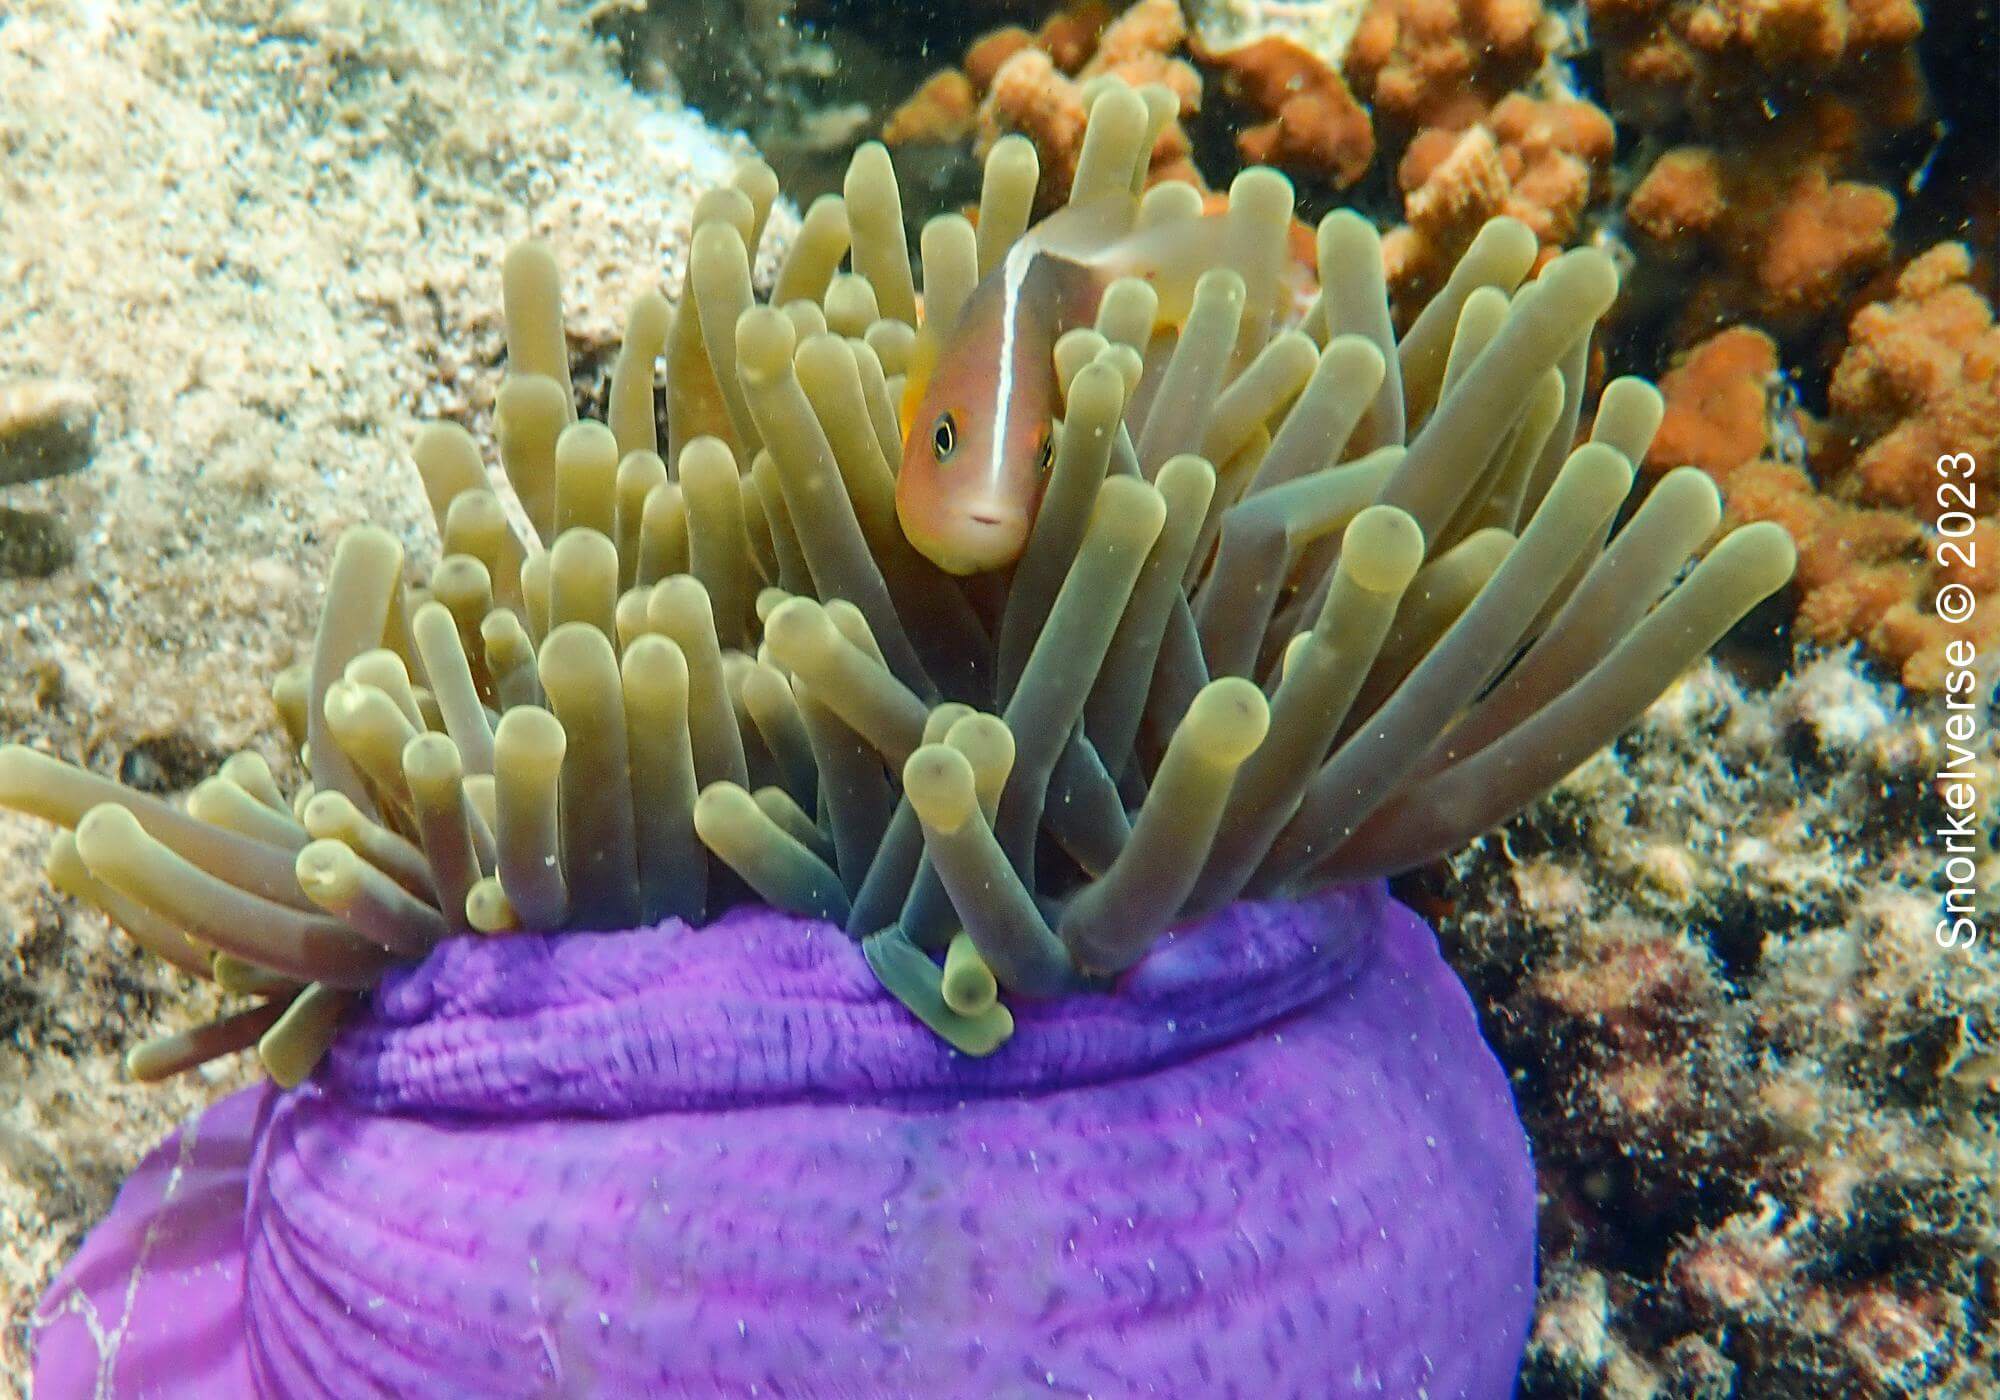 Nosestripe Anemonfeish in violet Anemone